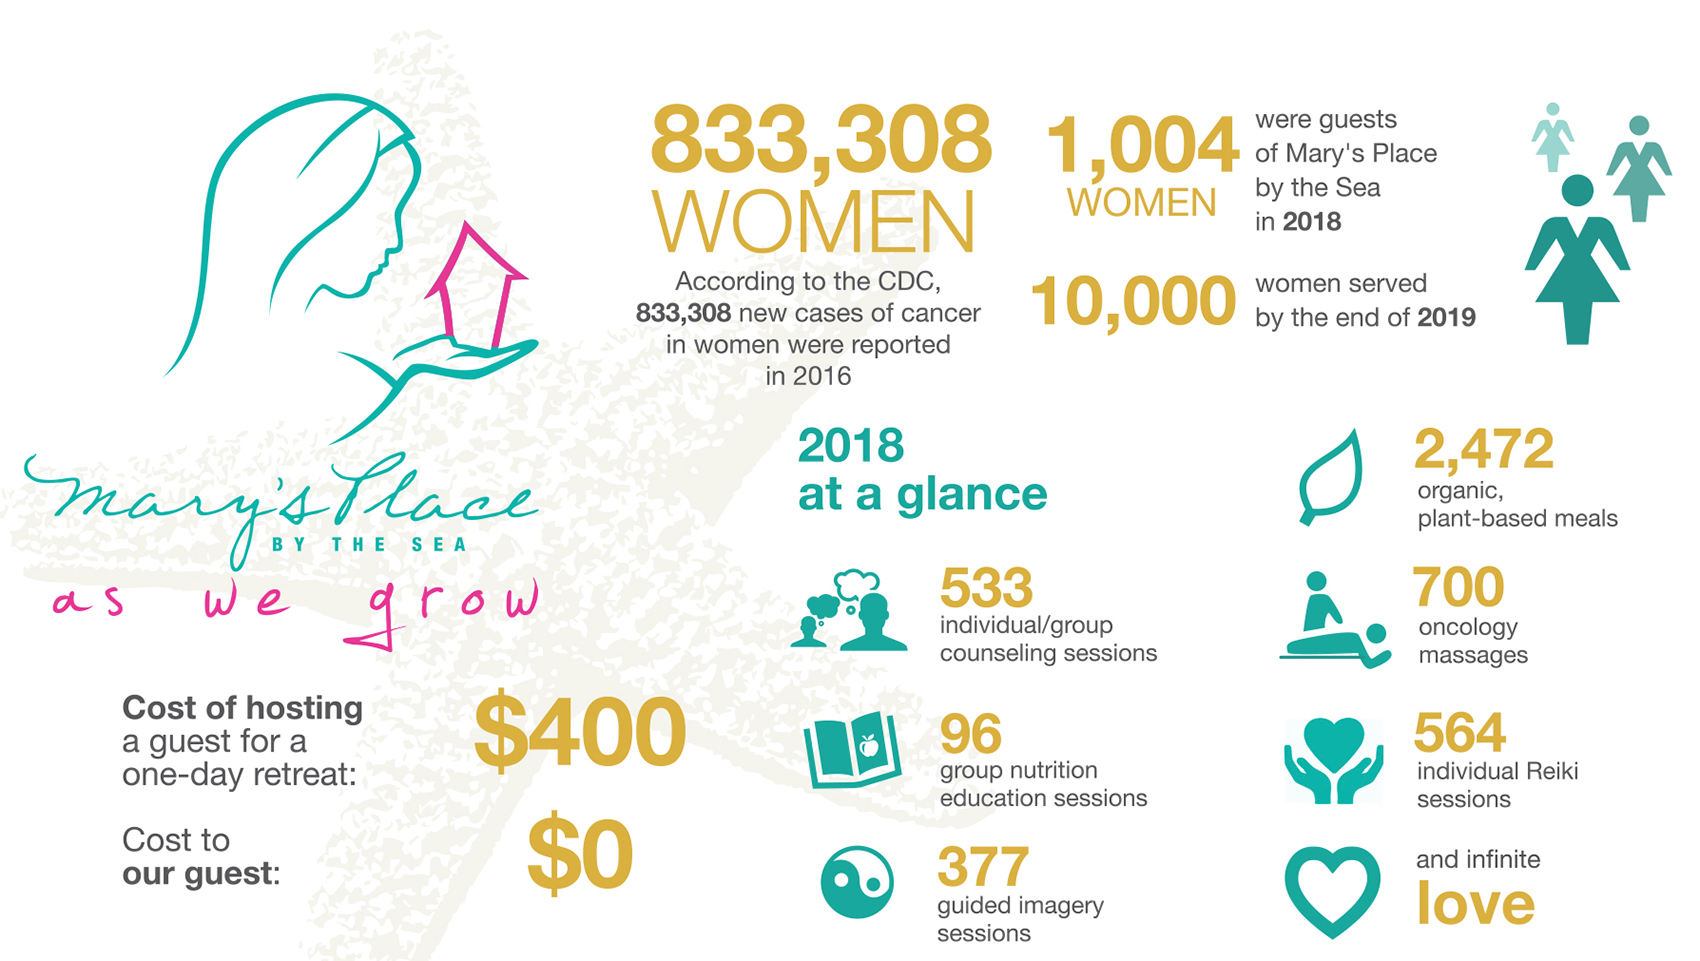 Since 2009, Mary’s Place has served over 10,000 women from across the United States